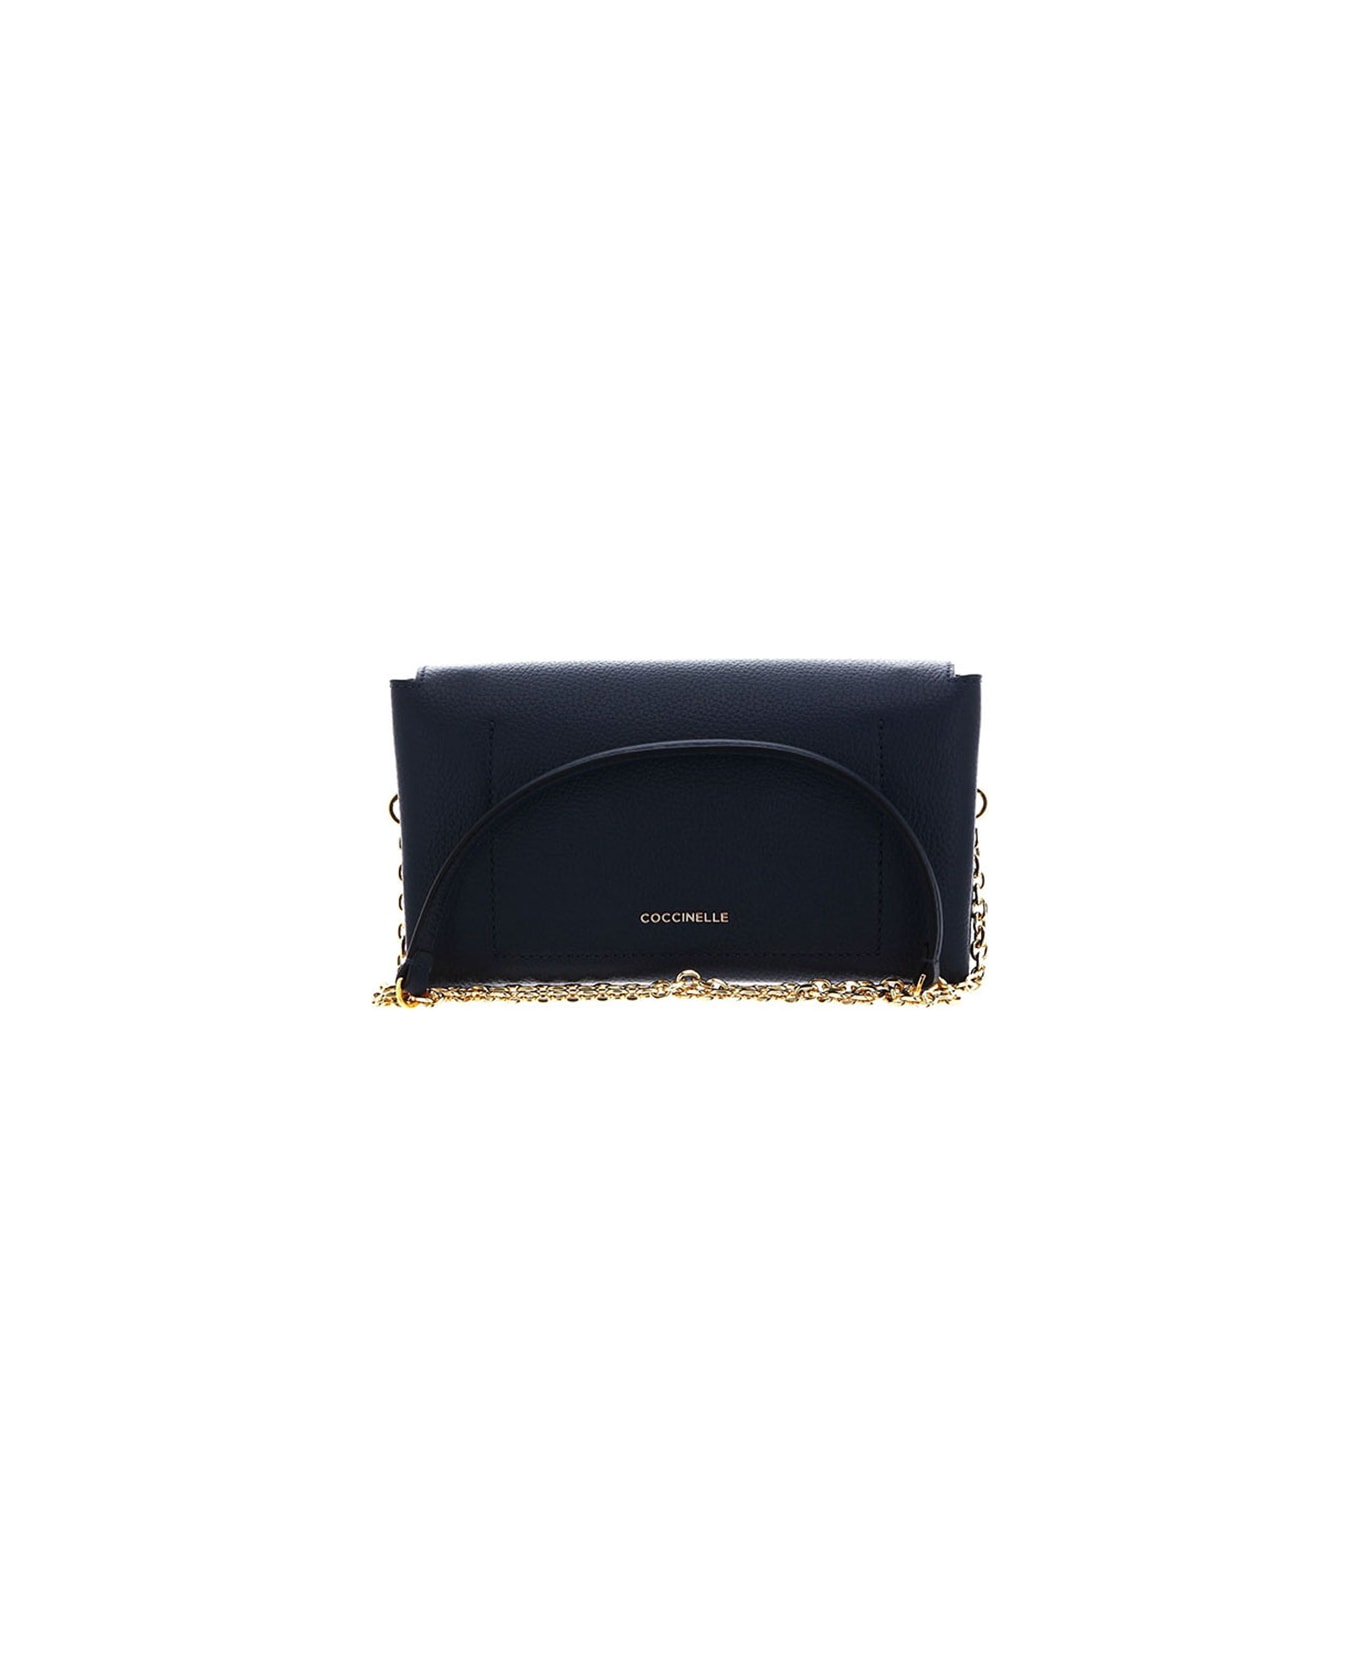 Coccinelle Arlettis Small Bag - Midnight blue